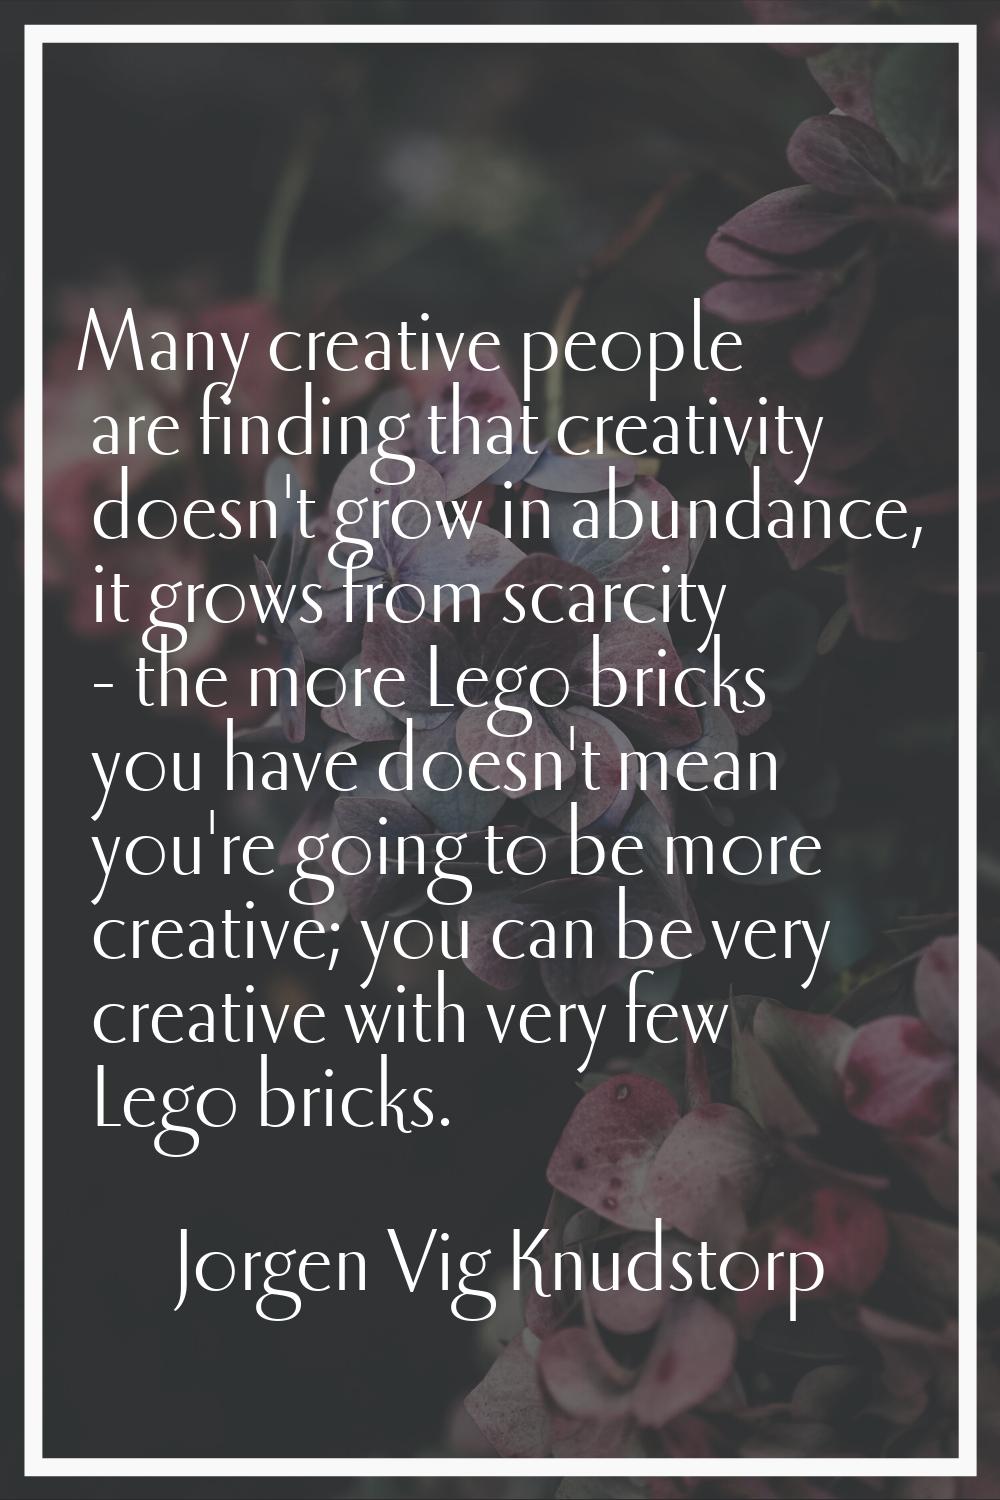 Many creative people are finding that creativity doesn't grow in abundance, it grows from scarcity 